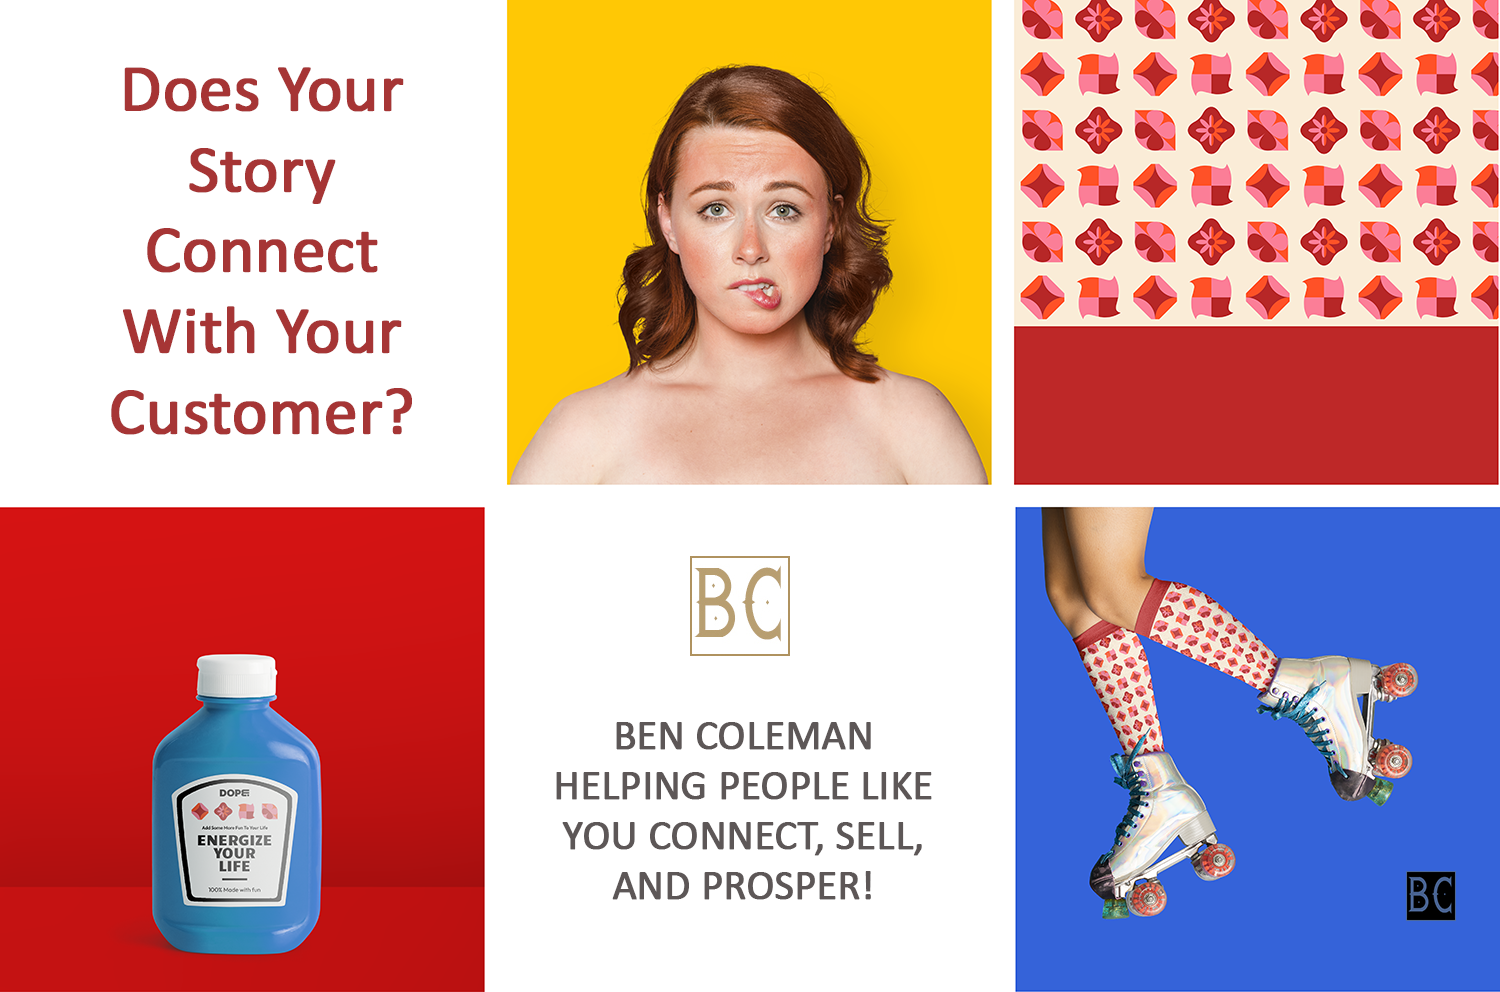 ben coleman helping people and business connect with their customers through storytelling